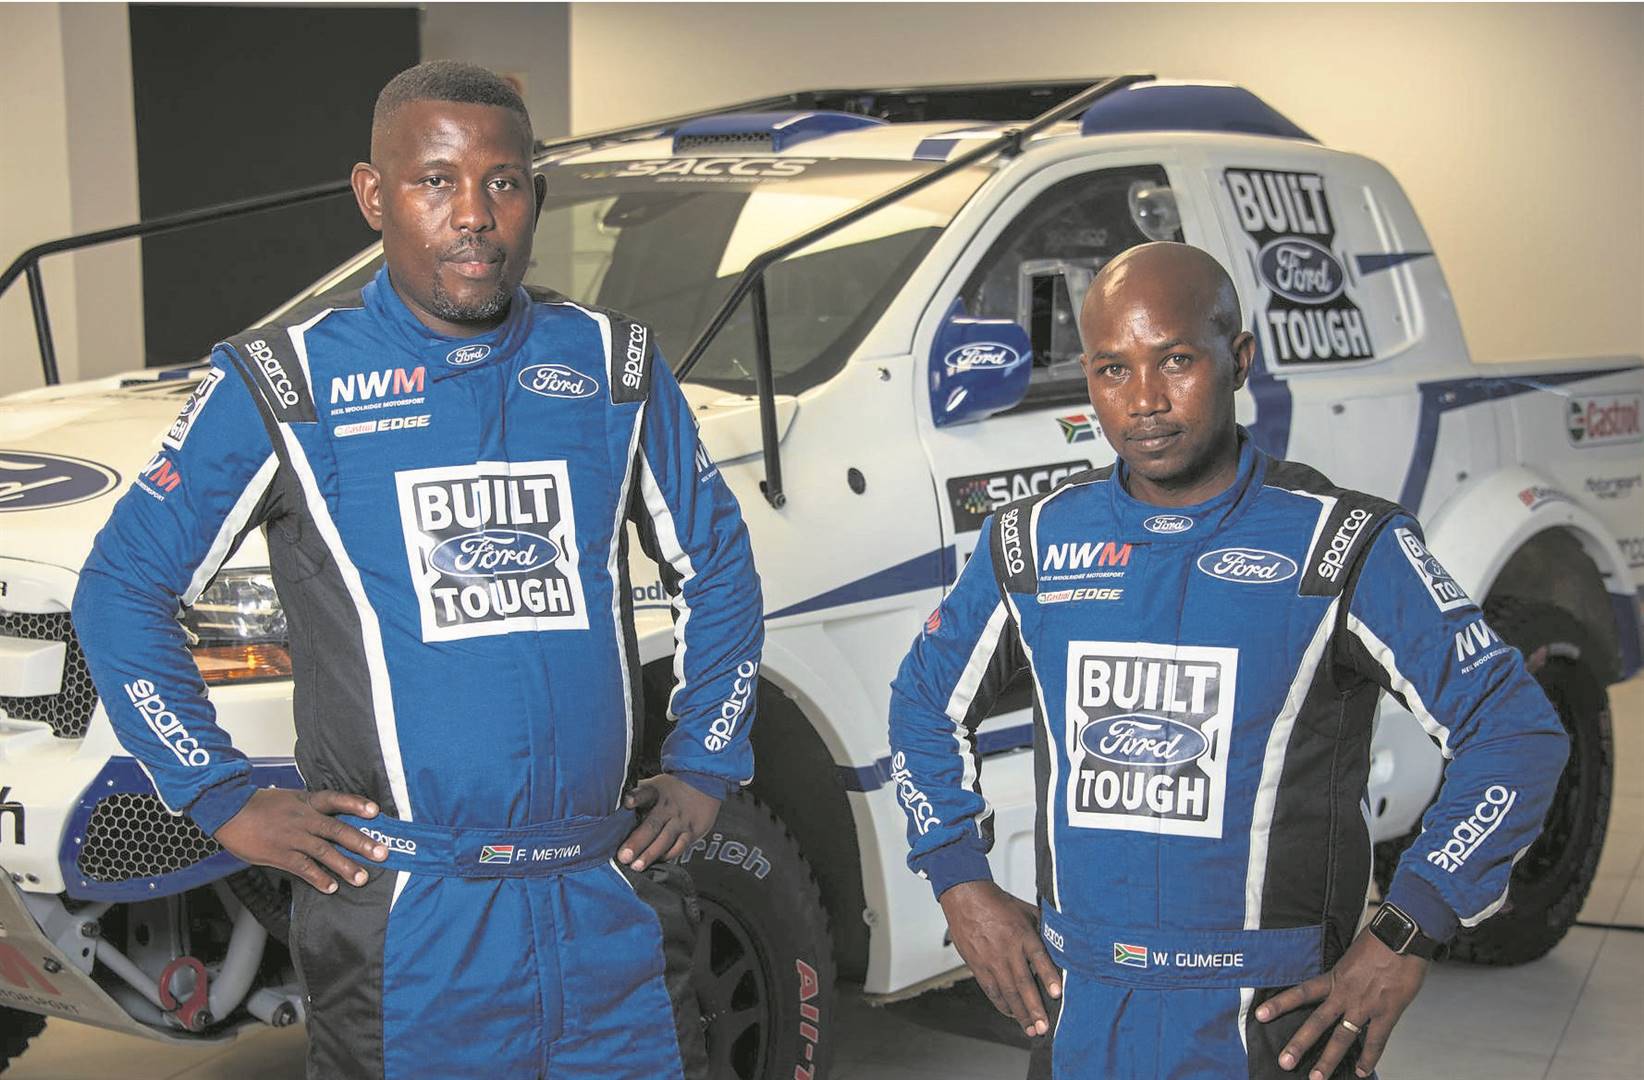 Delivery driver Wiseman Gumede (left) makes his motorsport debut with the Ford NWM Development Team entry, joined by regional rally champion navigator Fanifani Meyiwa.